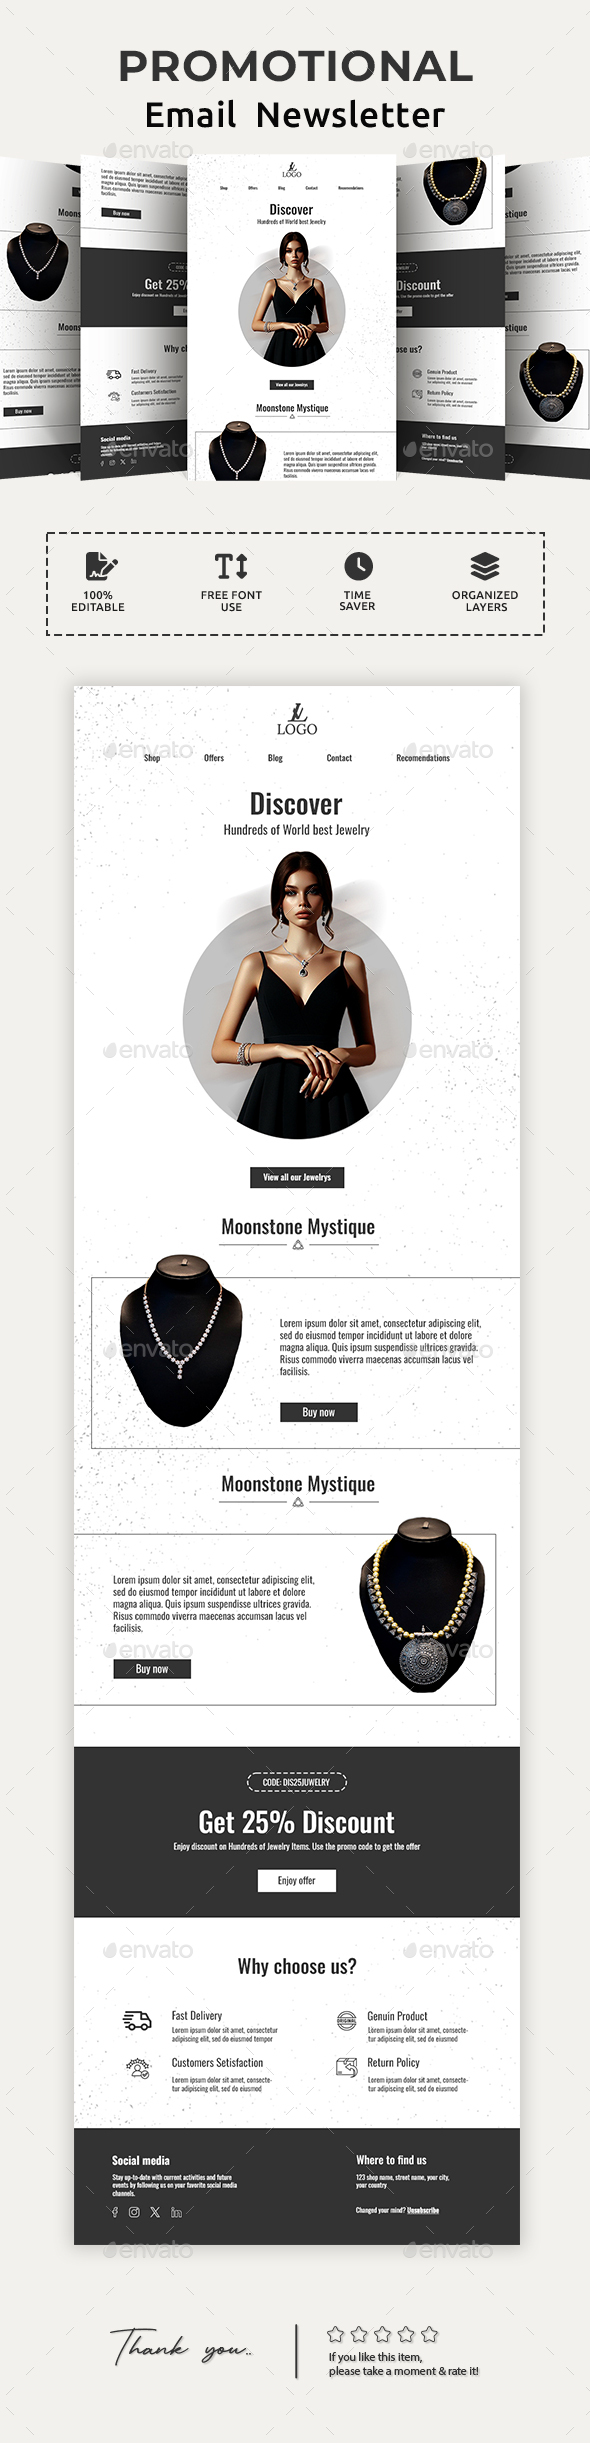 [DOWNLOAD]Jewellery Email Newsletter PSD Template